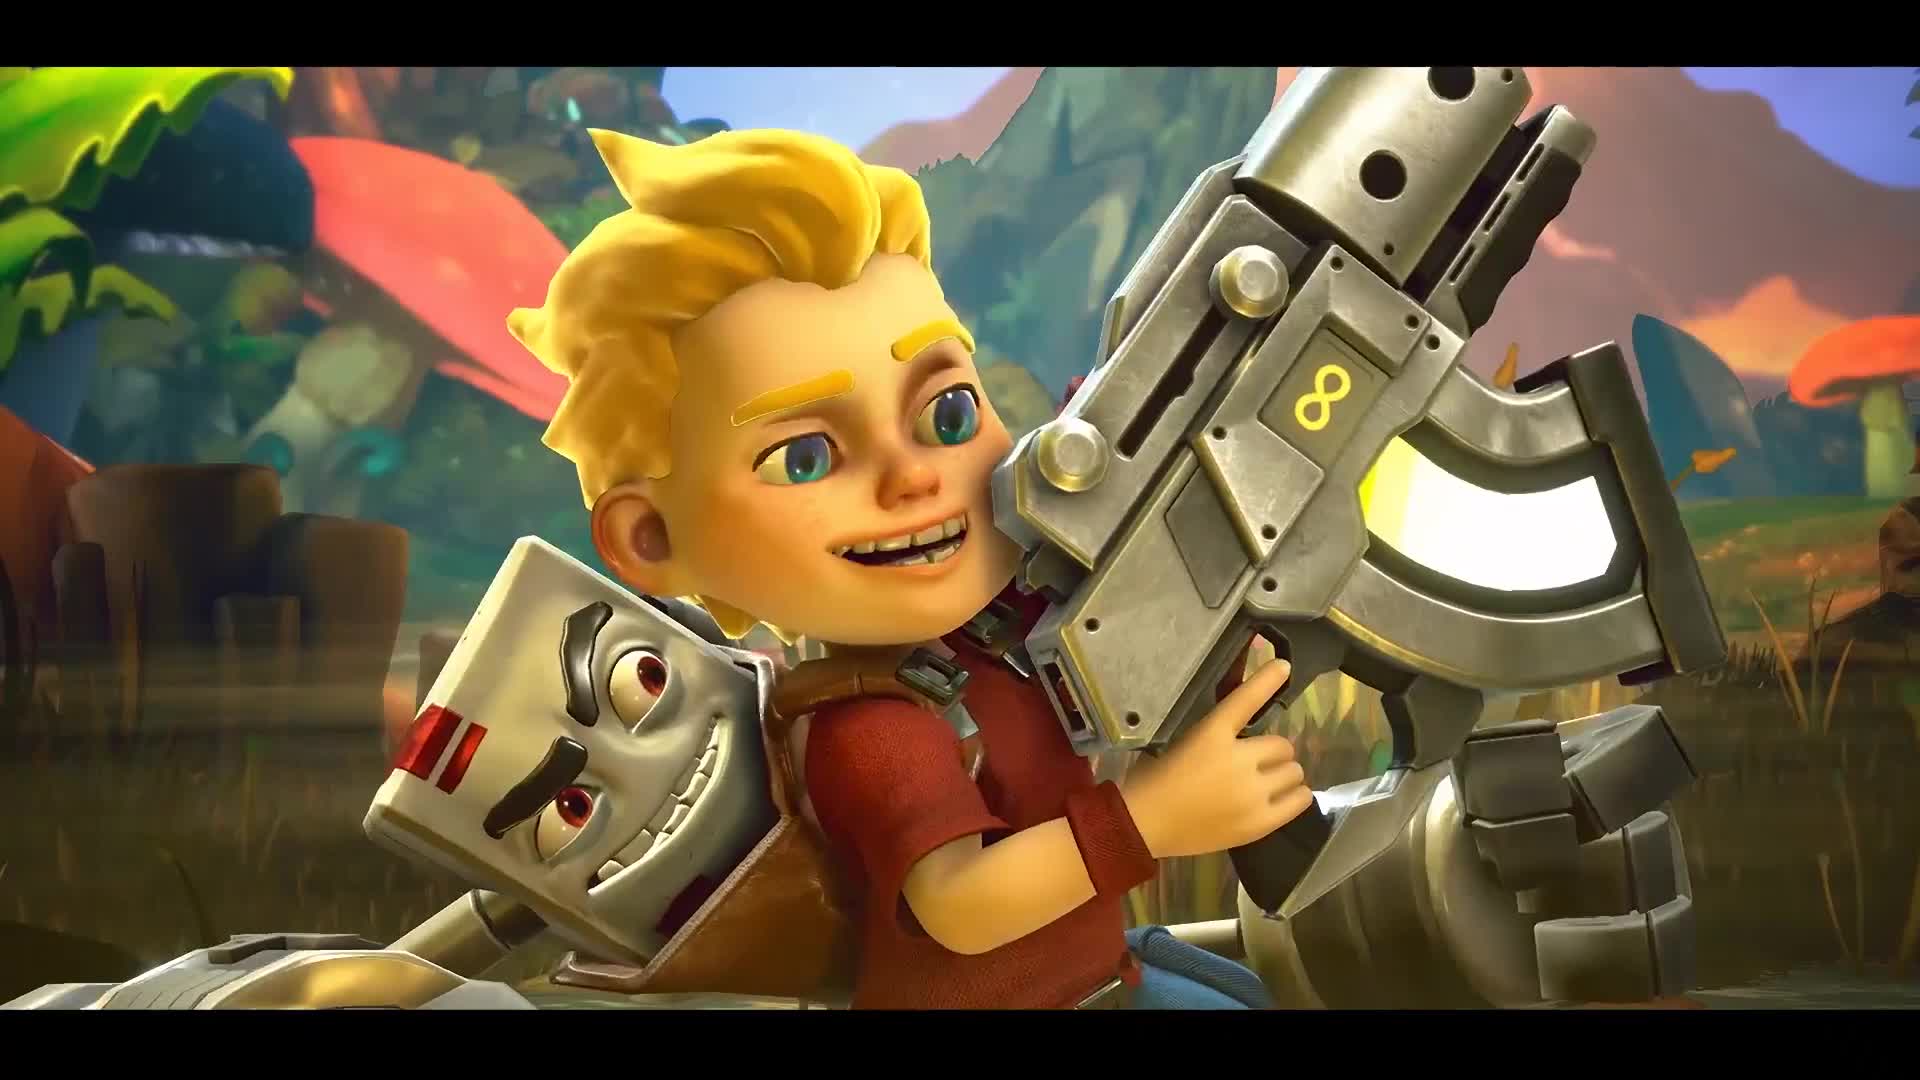 Rad Rodgers - Release Trailer